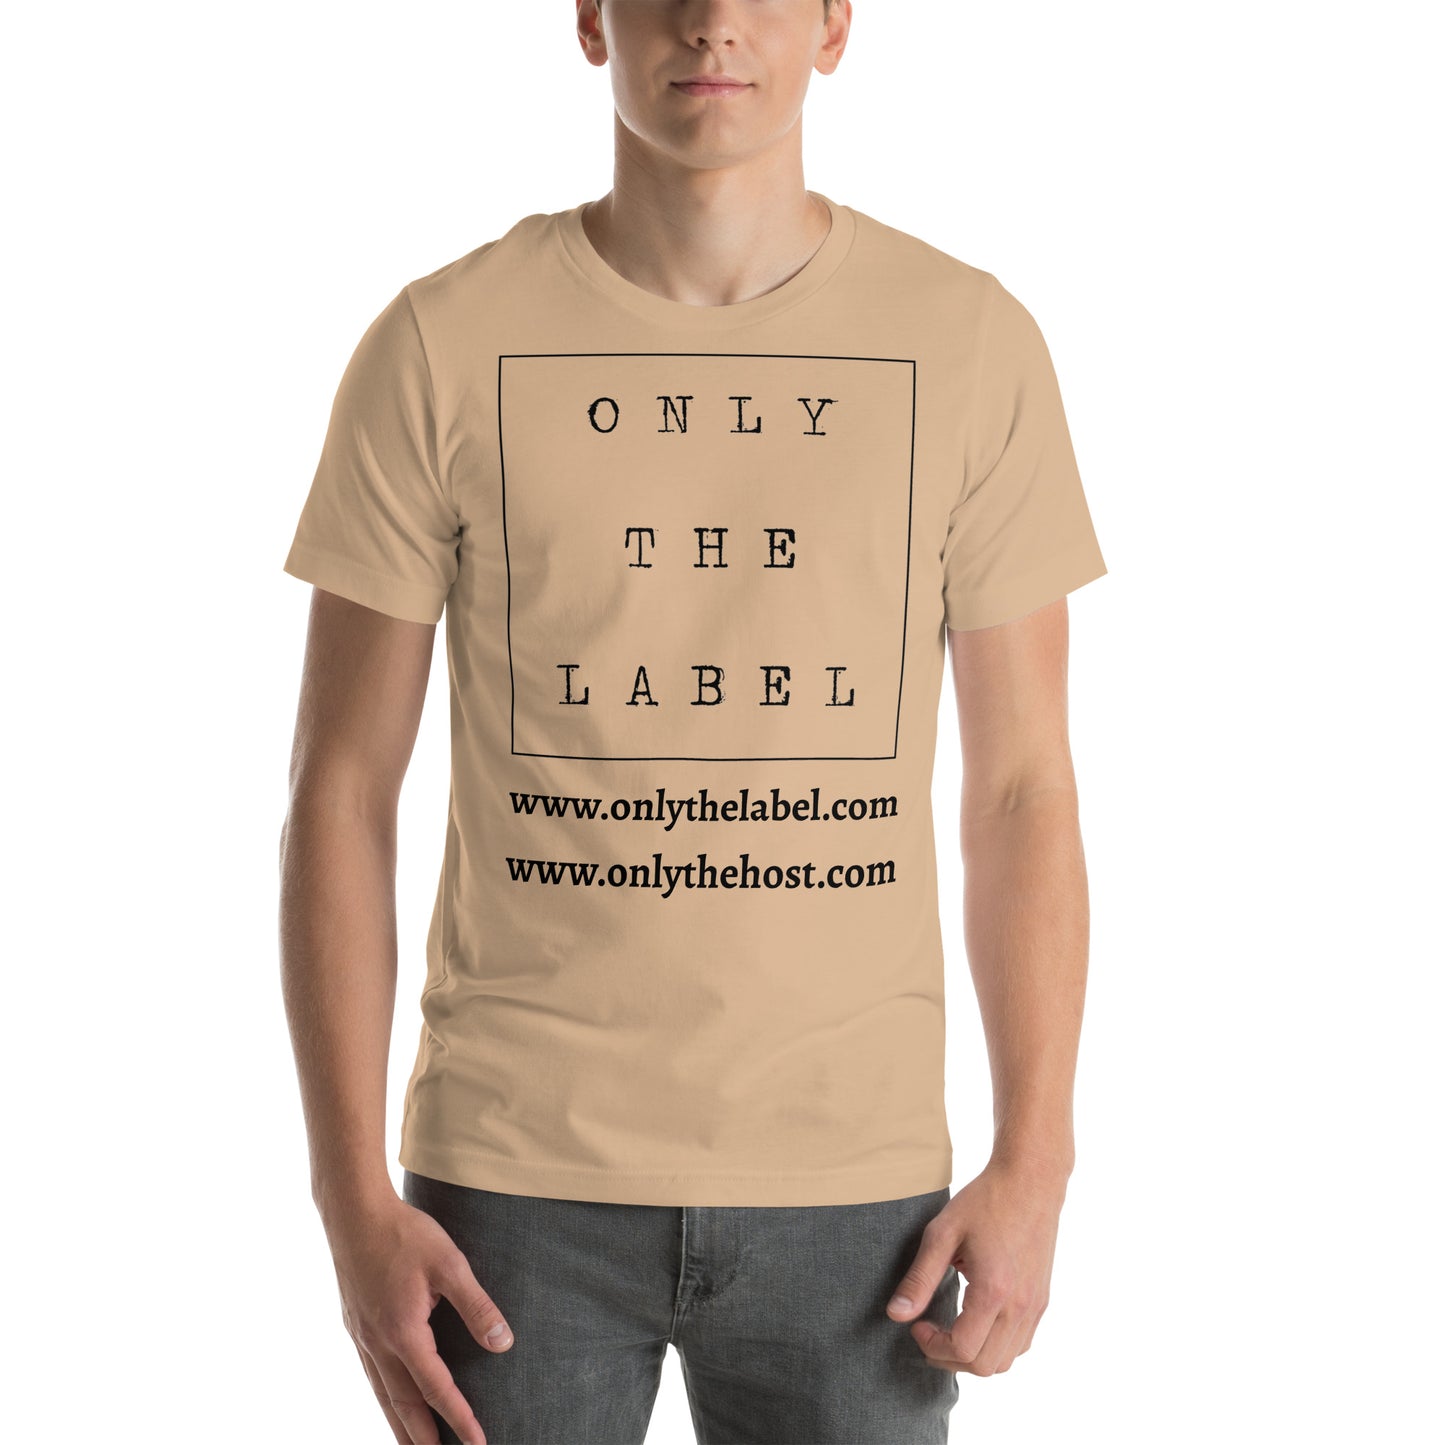 Only The Label Logo And Websites T-Shirt